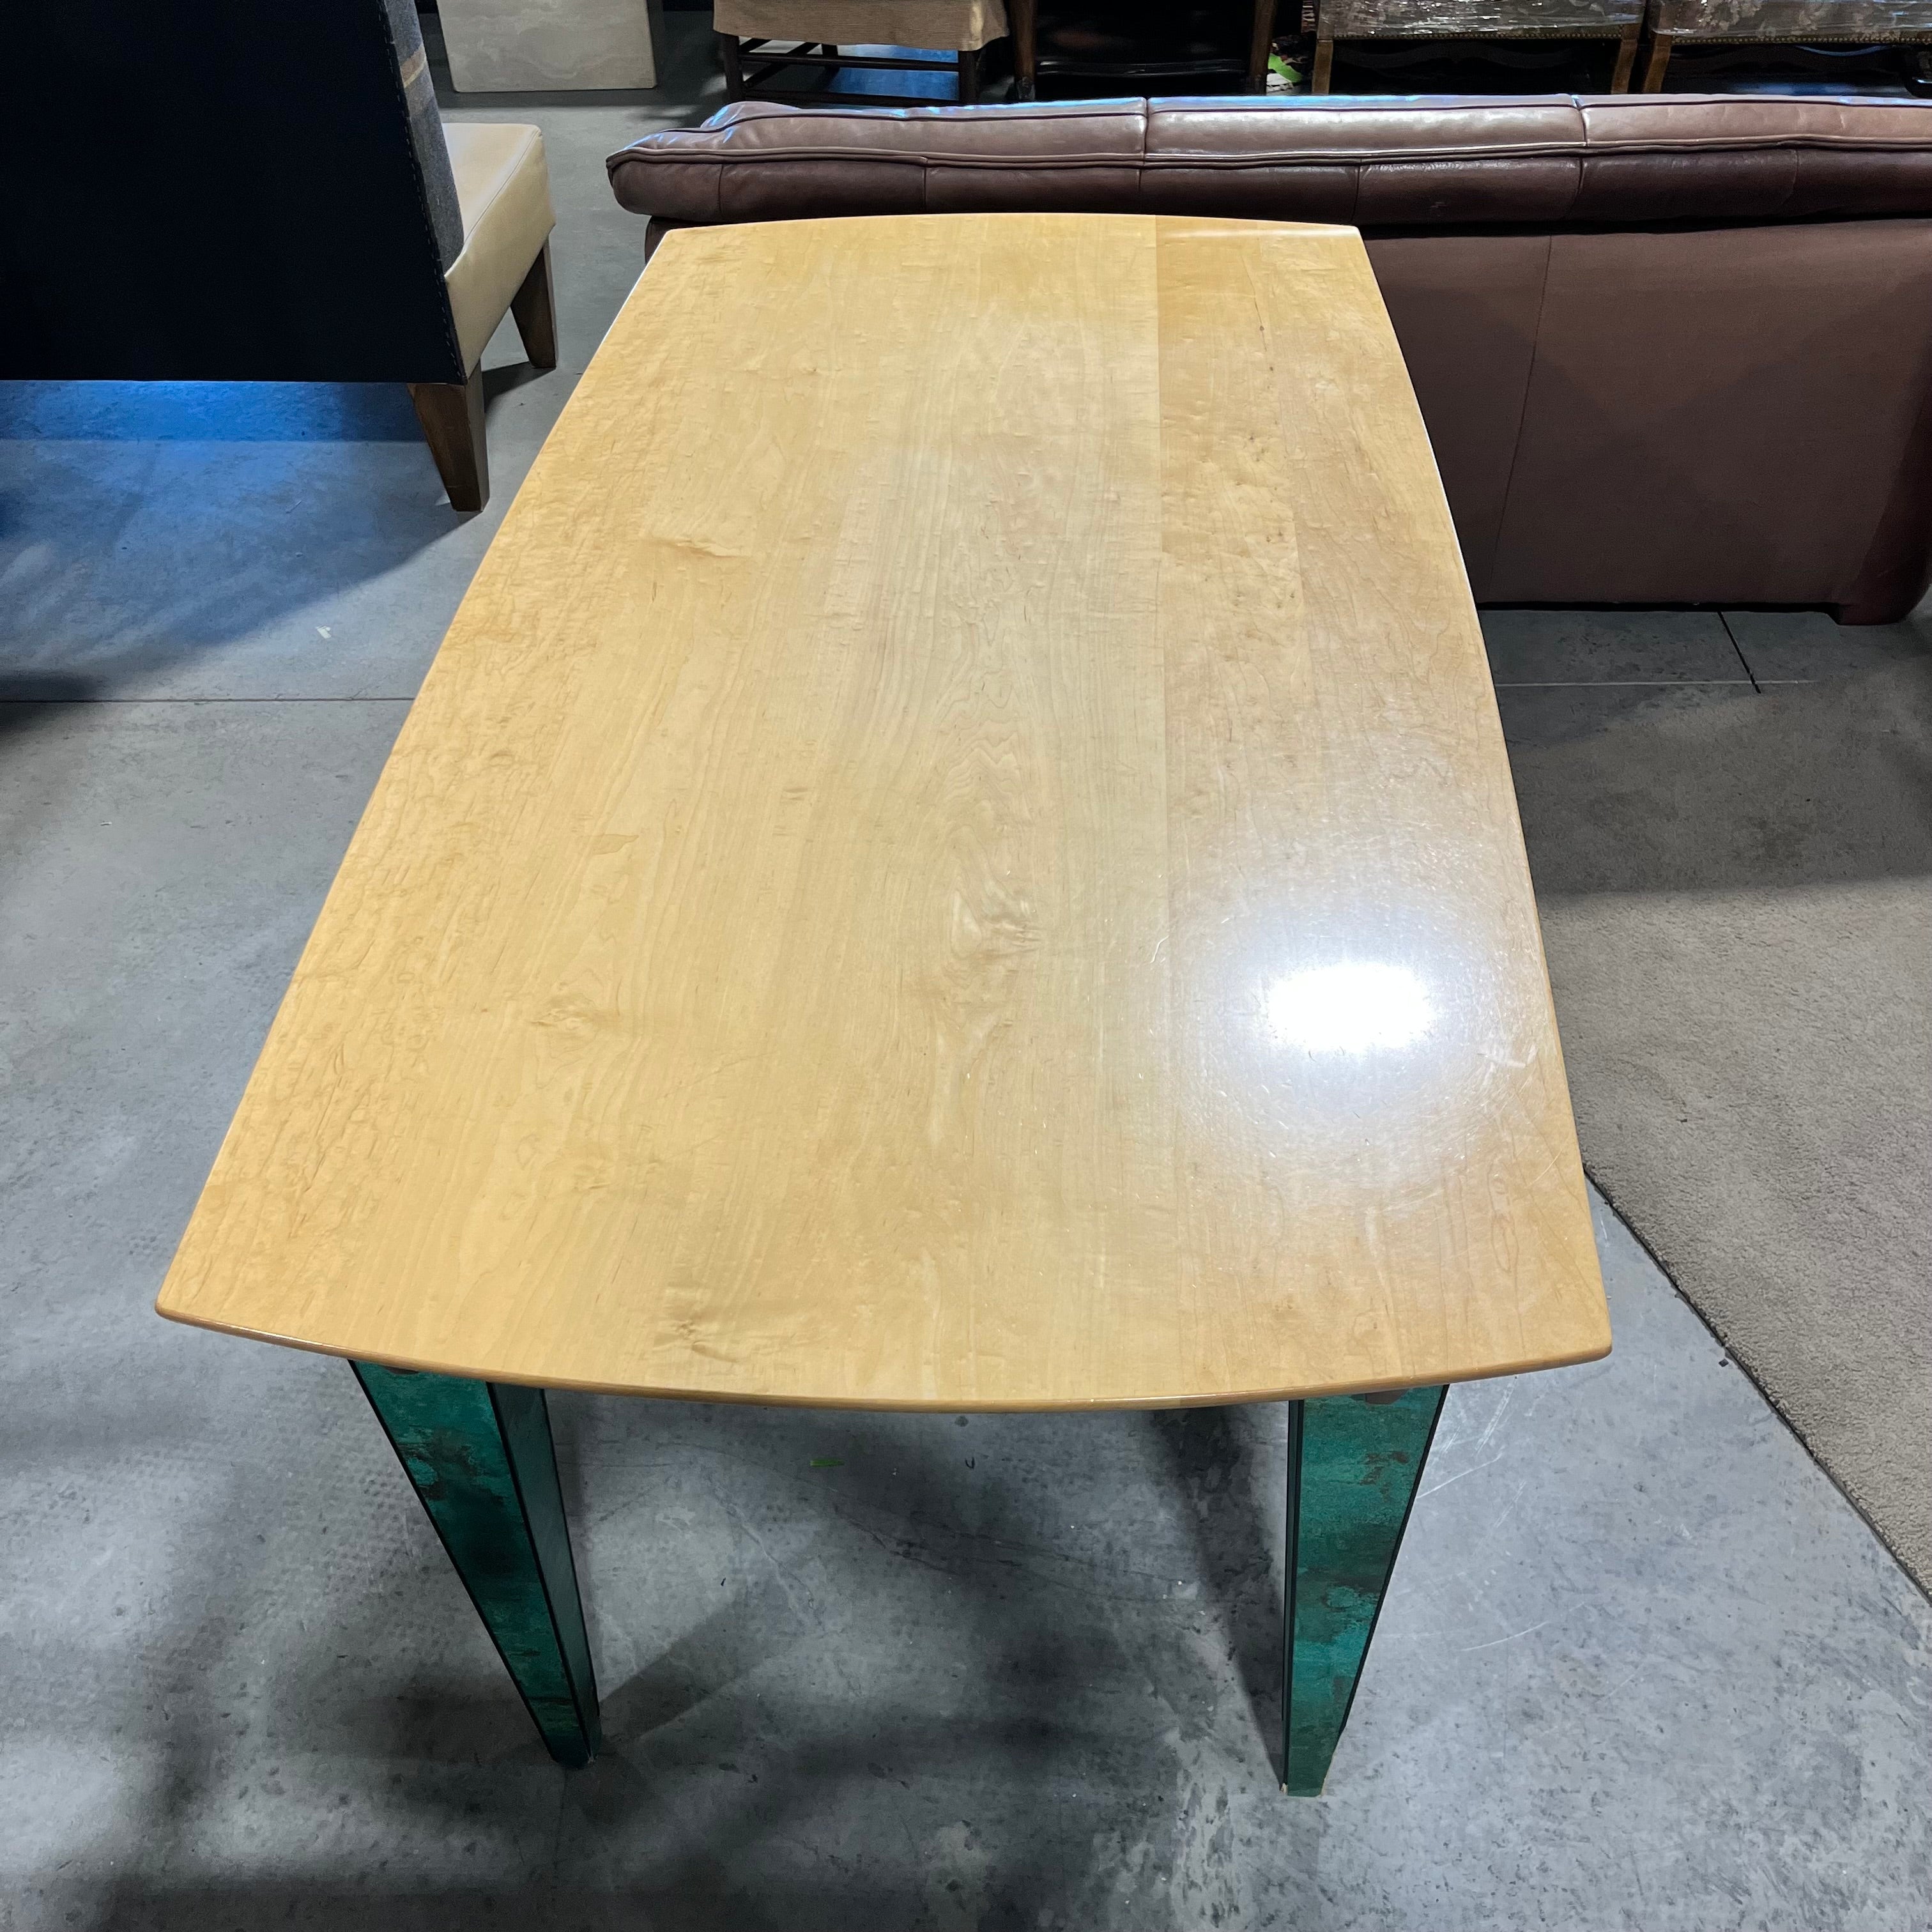 Maple Top with Green Legs Dining Table 72" x 36" x 29"